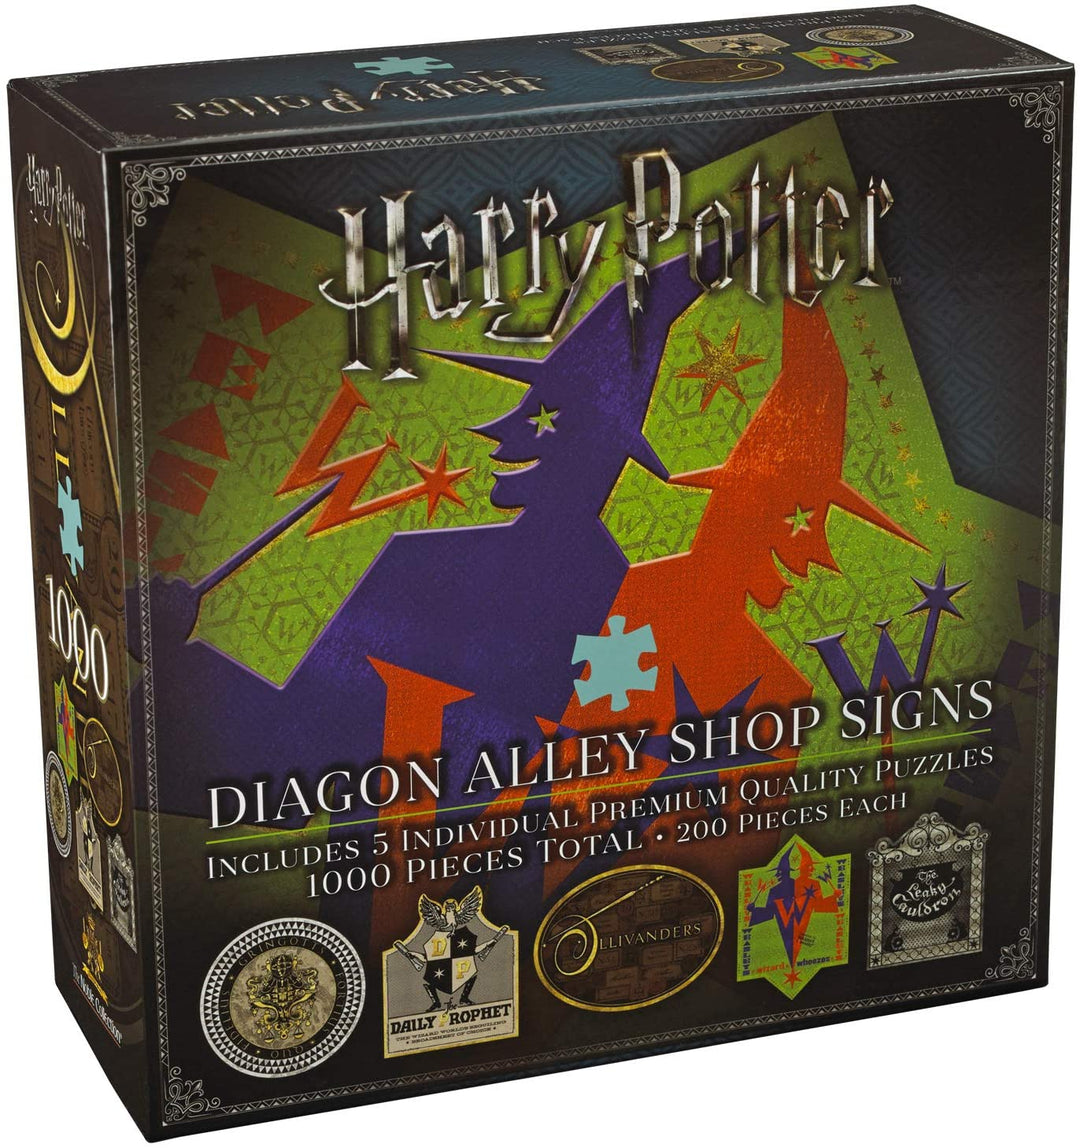 The Noble Collection 5x Diagon Alley Shop Signs 200pc Jigsaw Puzzles